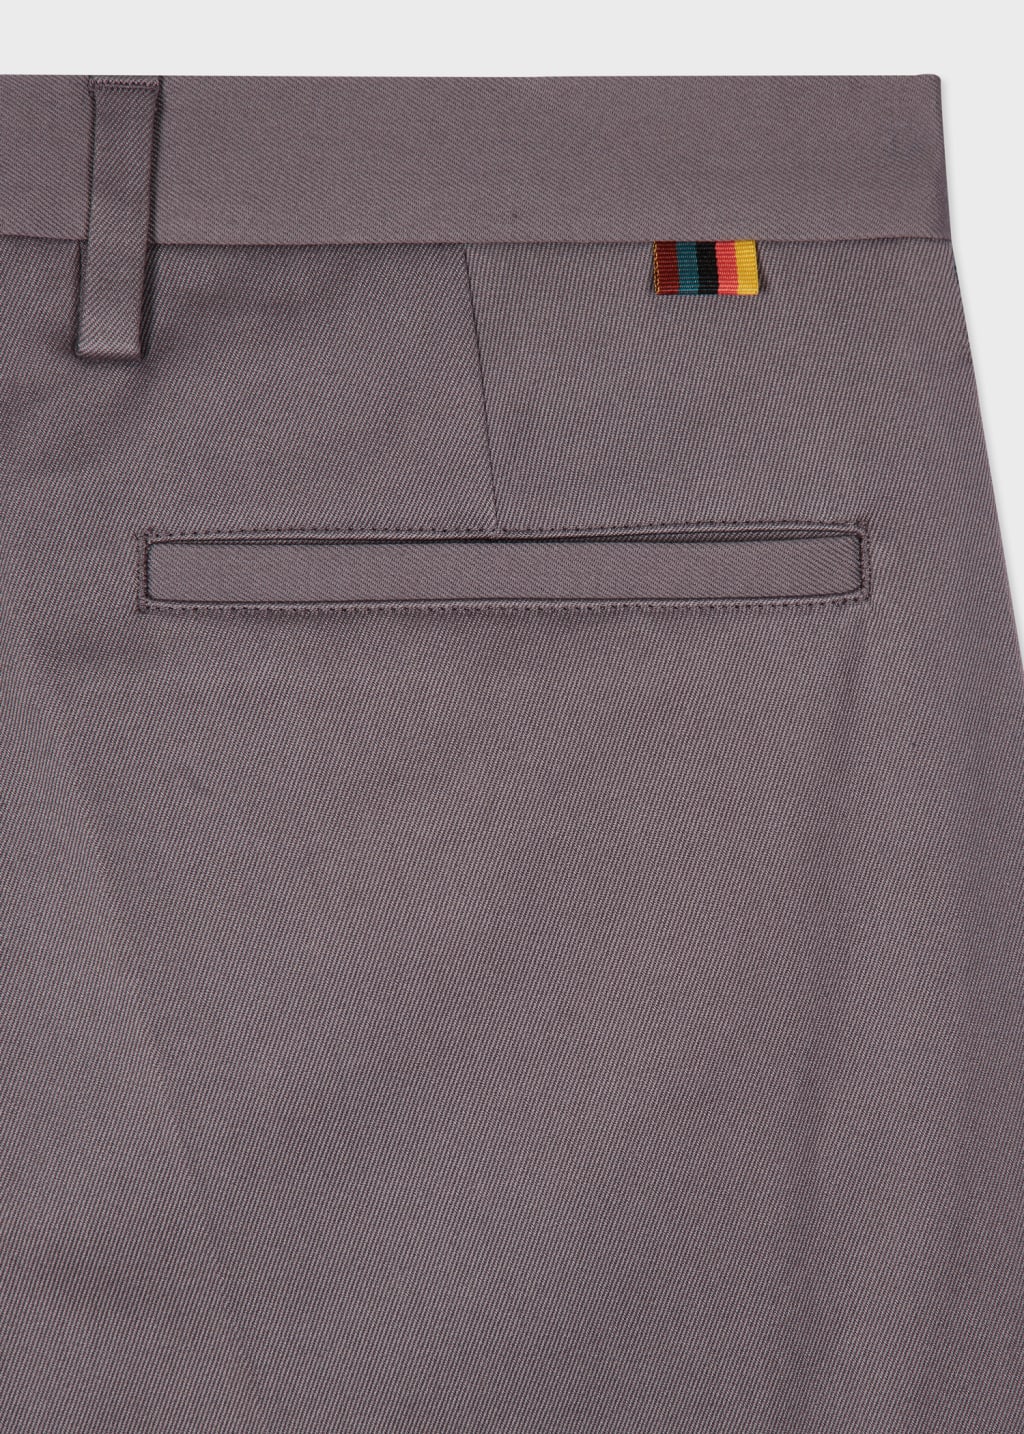 Detail View - Slim-Fit Ash Grey Cotton-Stretch Chinos Paul Smith